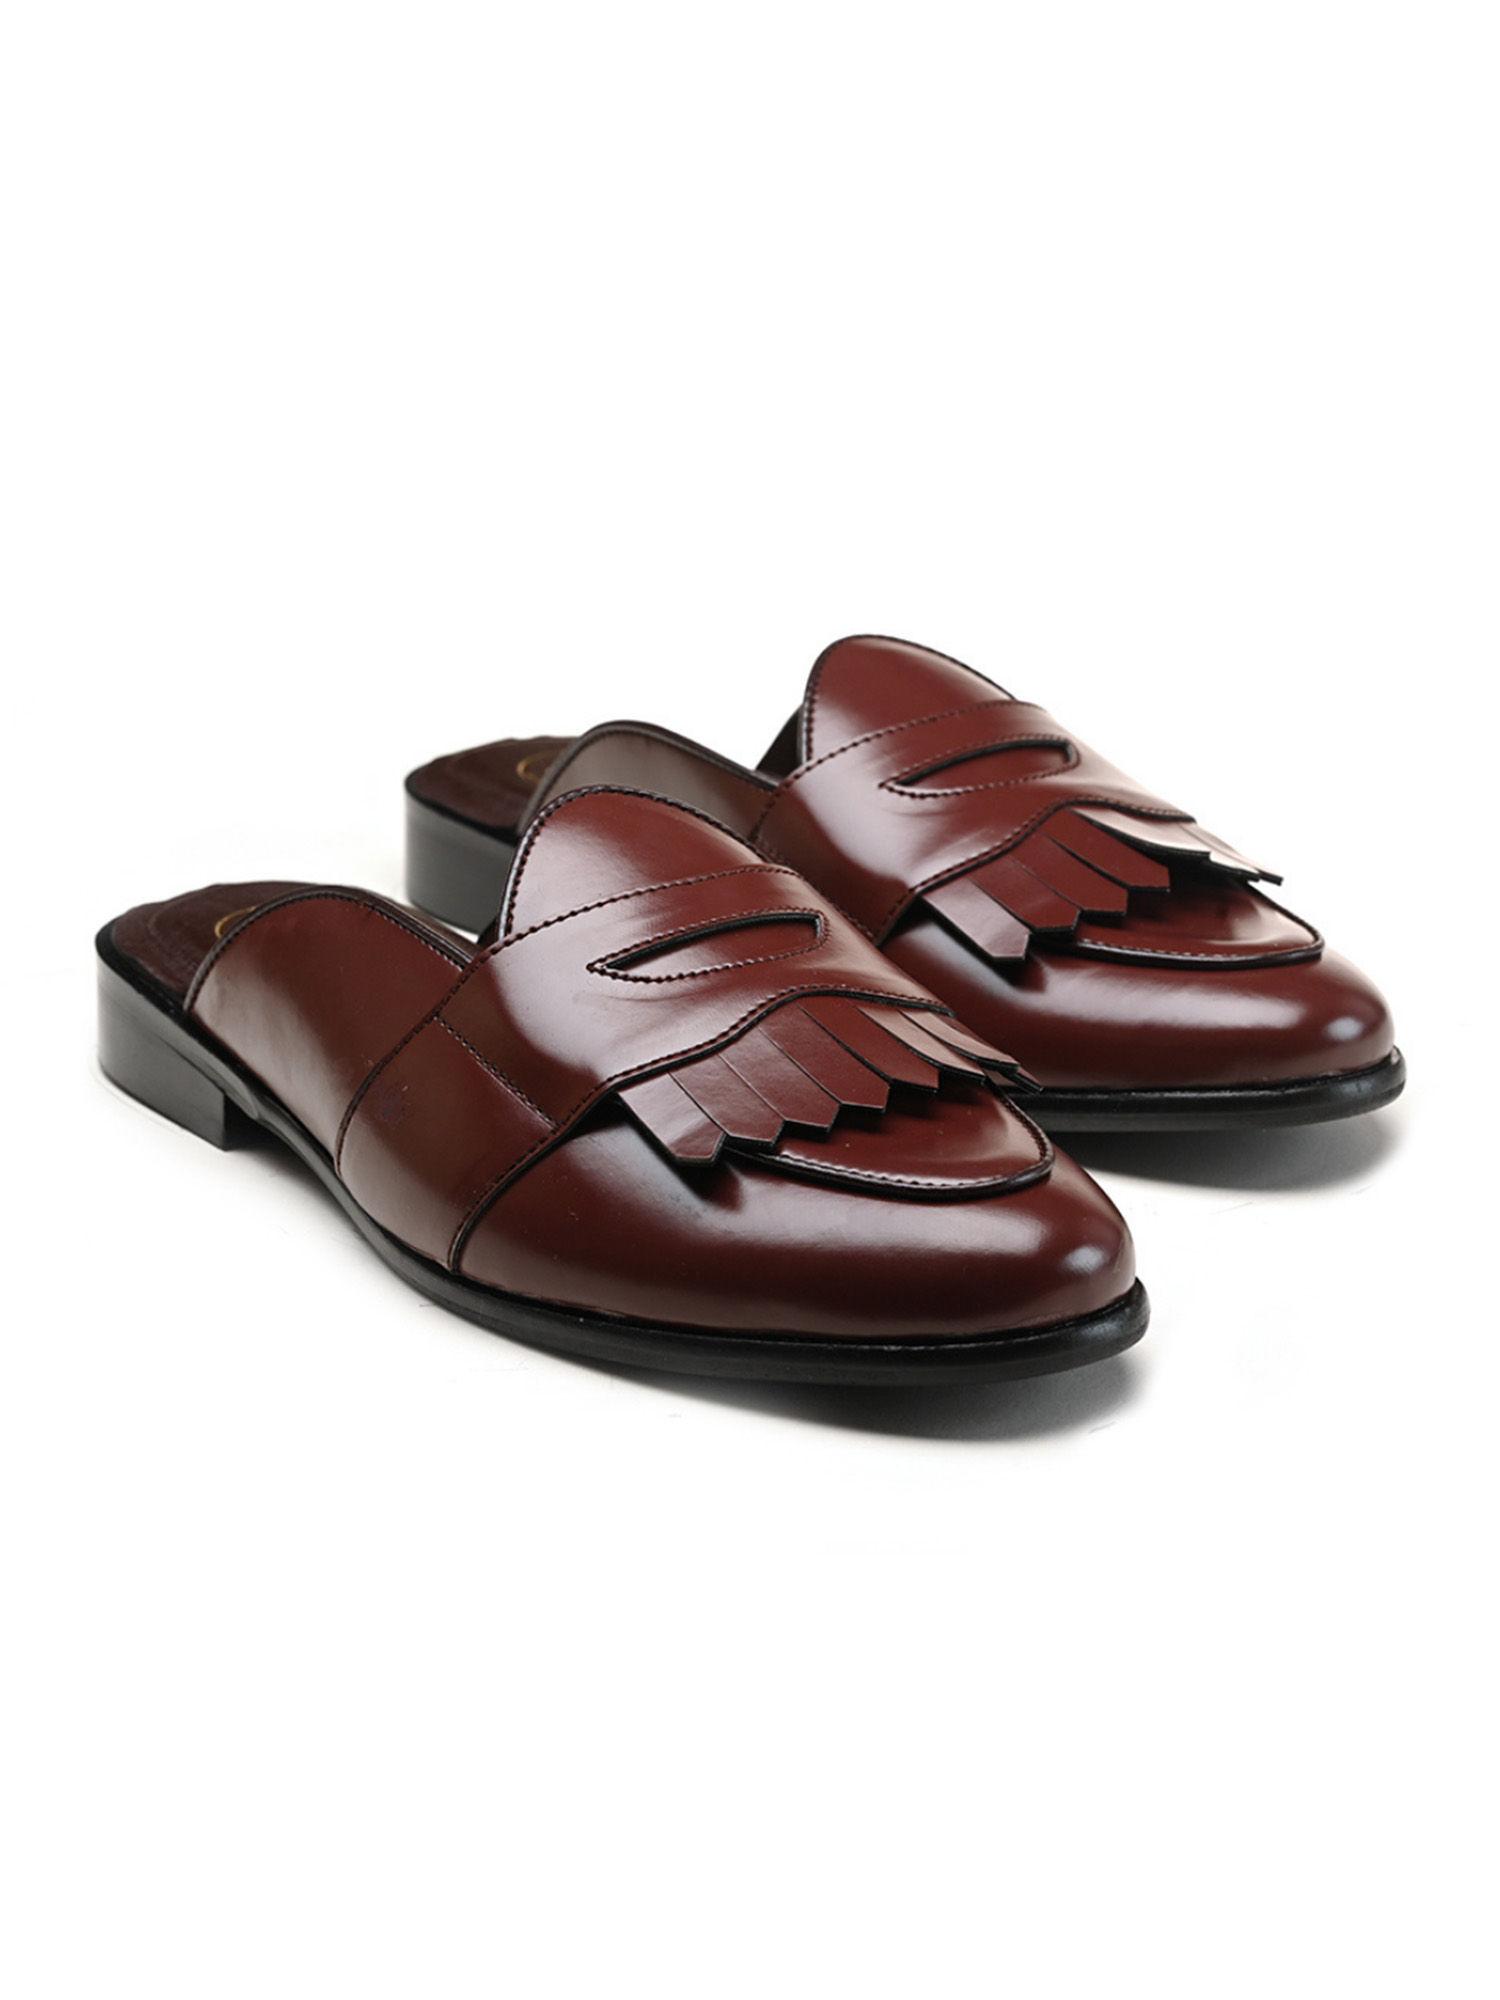 luxious burgundy mules shoes with fringes